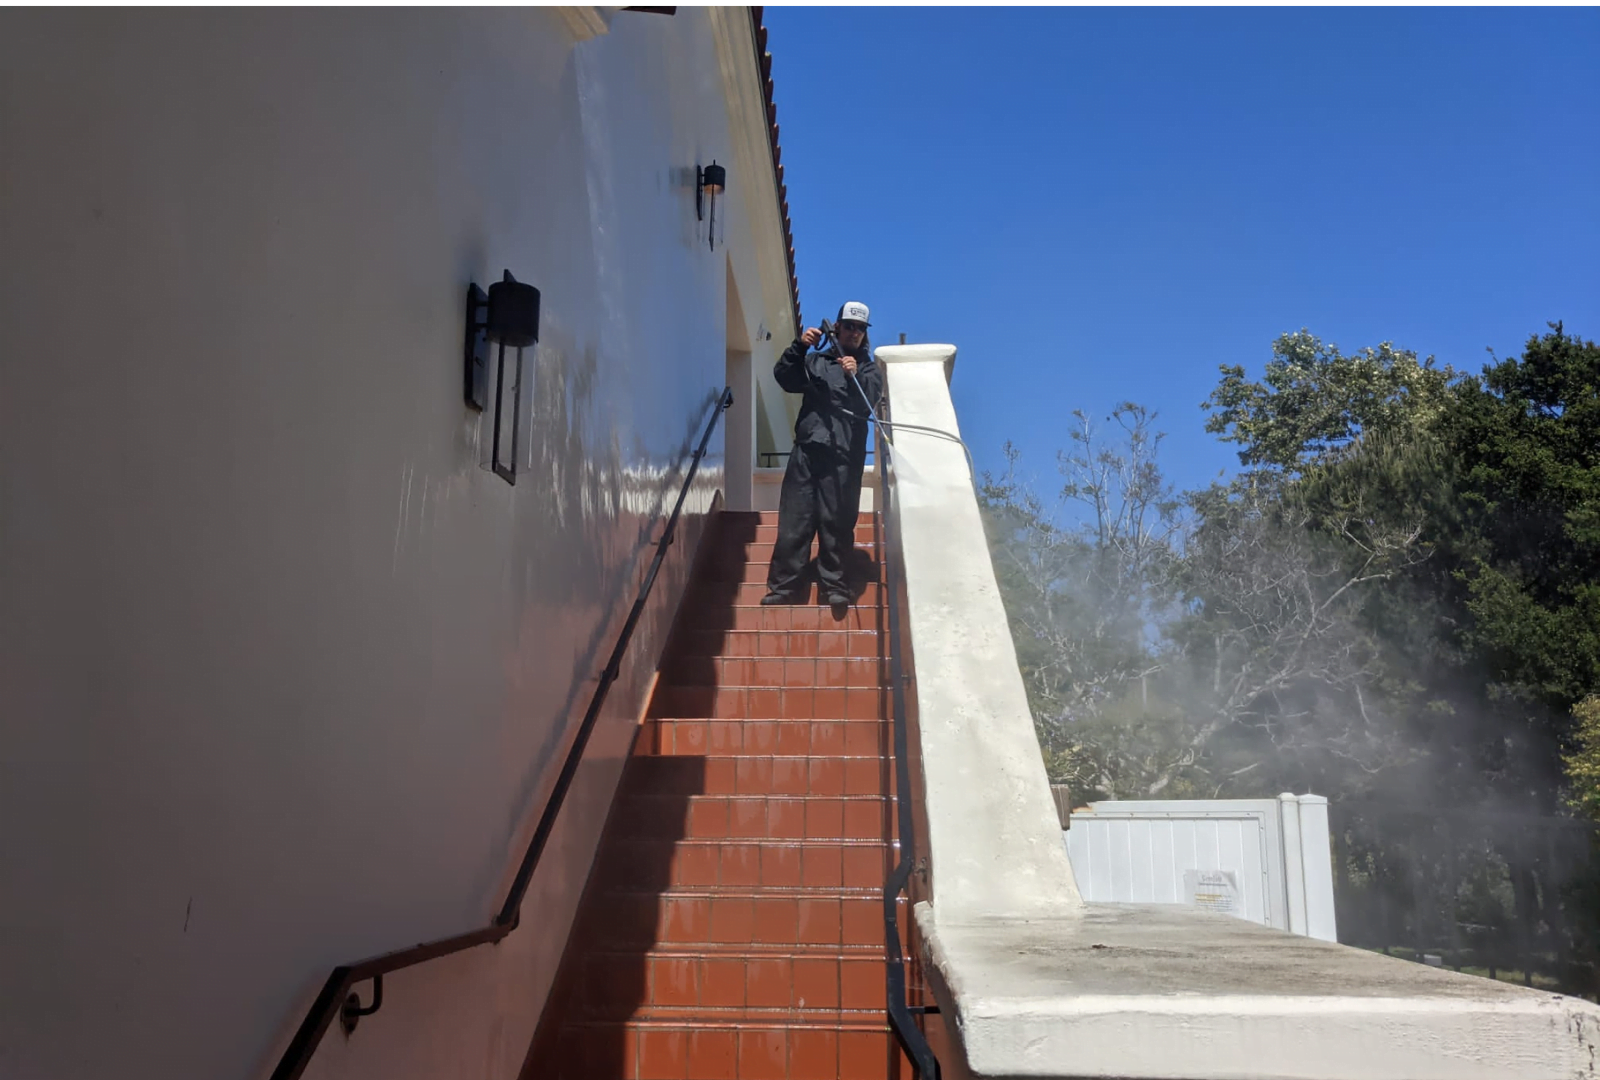 Pressure Washing Services - Stairs - The Glass Man Window Washing